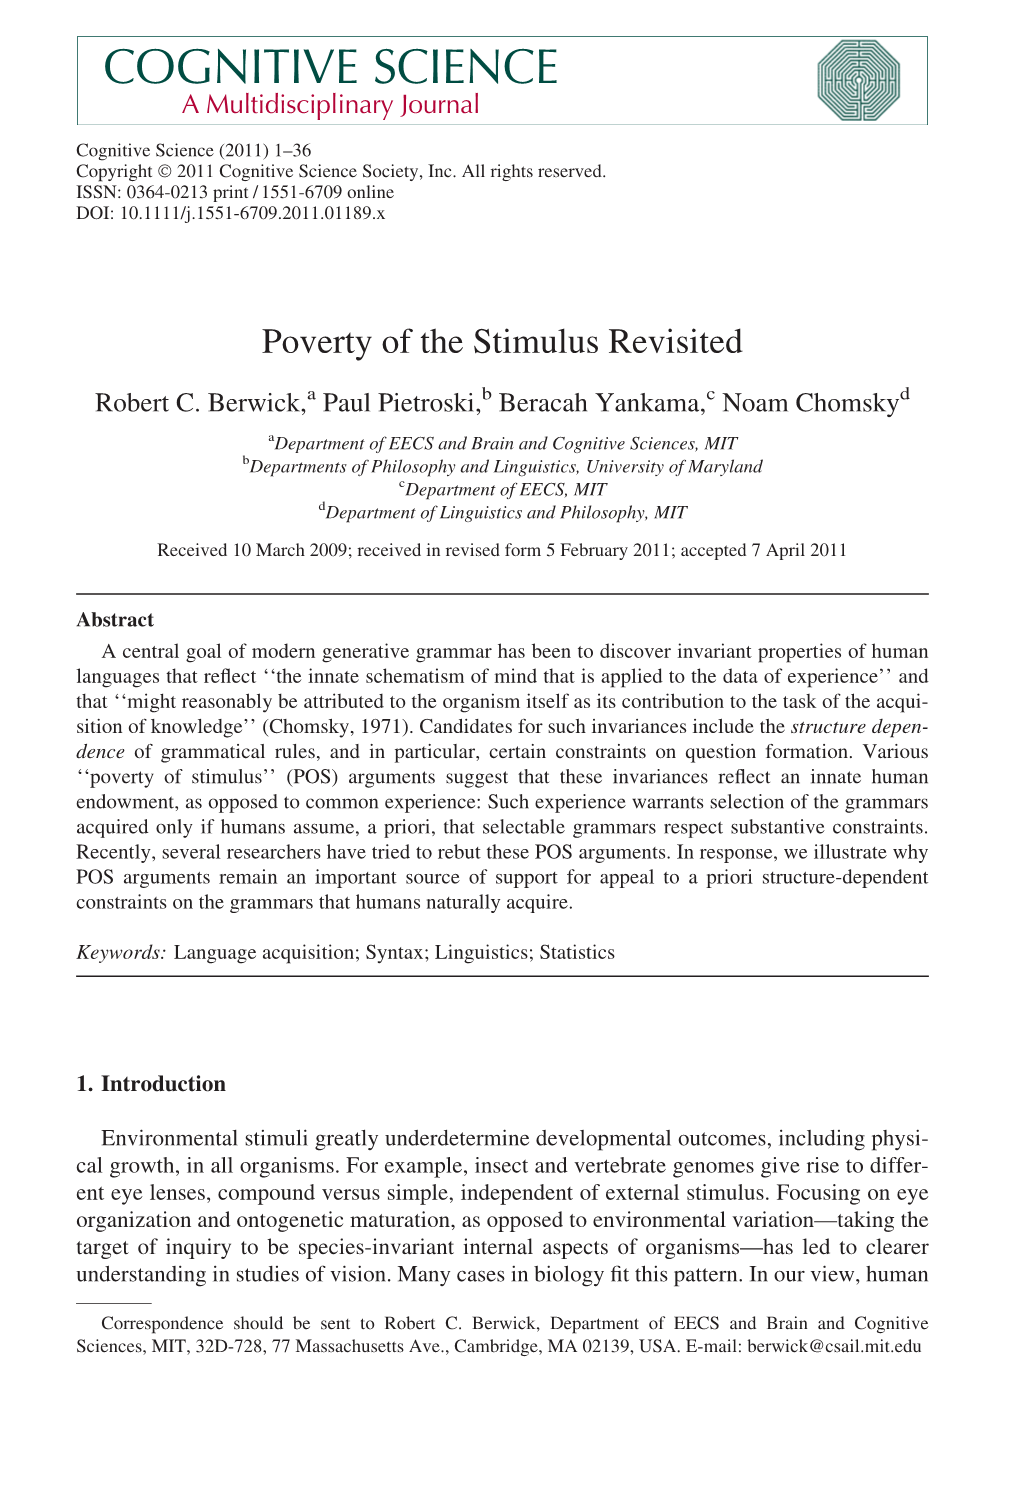 Poverty of the Stimulus Revisited